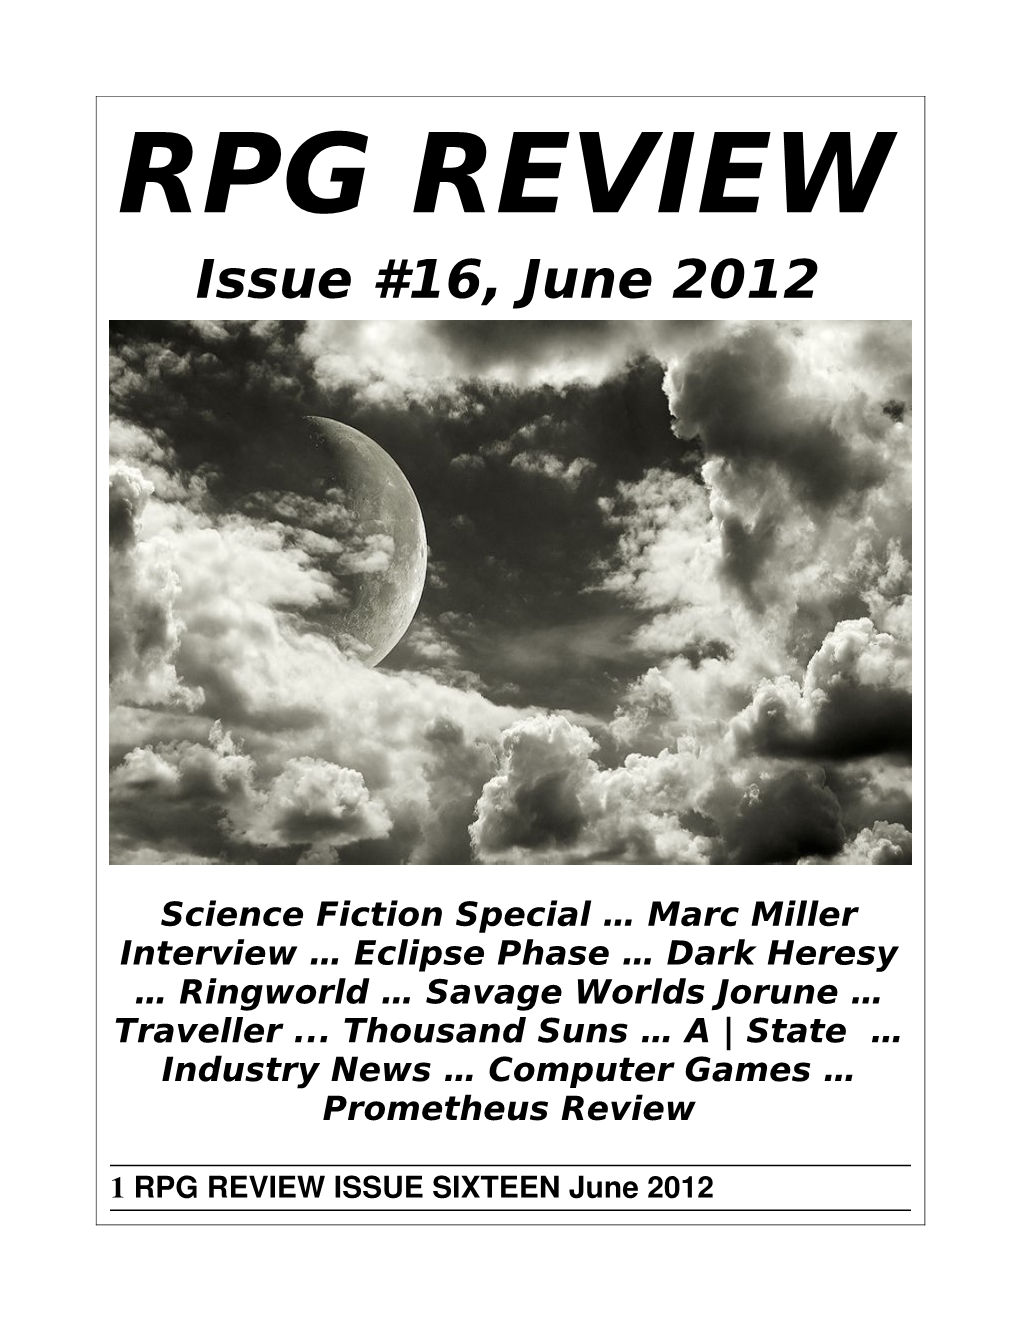 RPG Review, Issue 16, June 2012